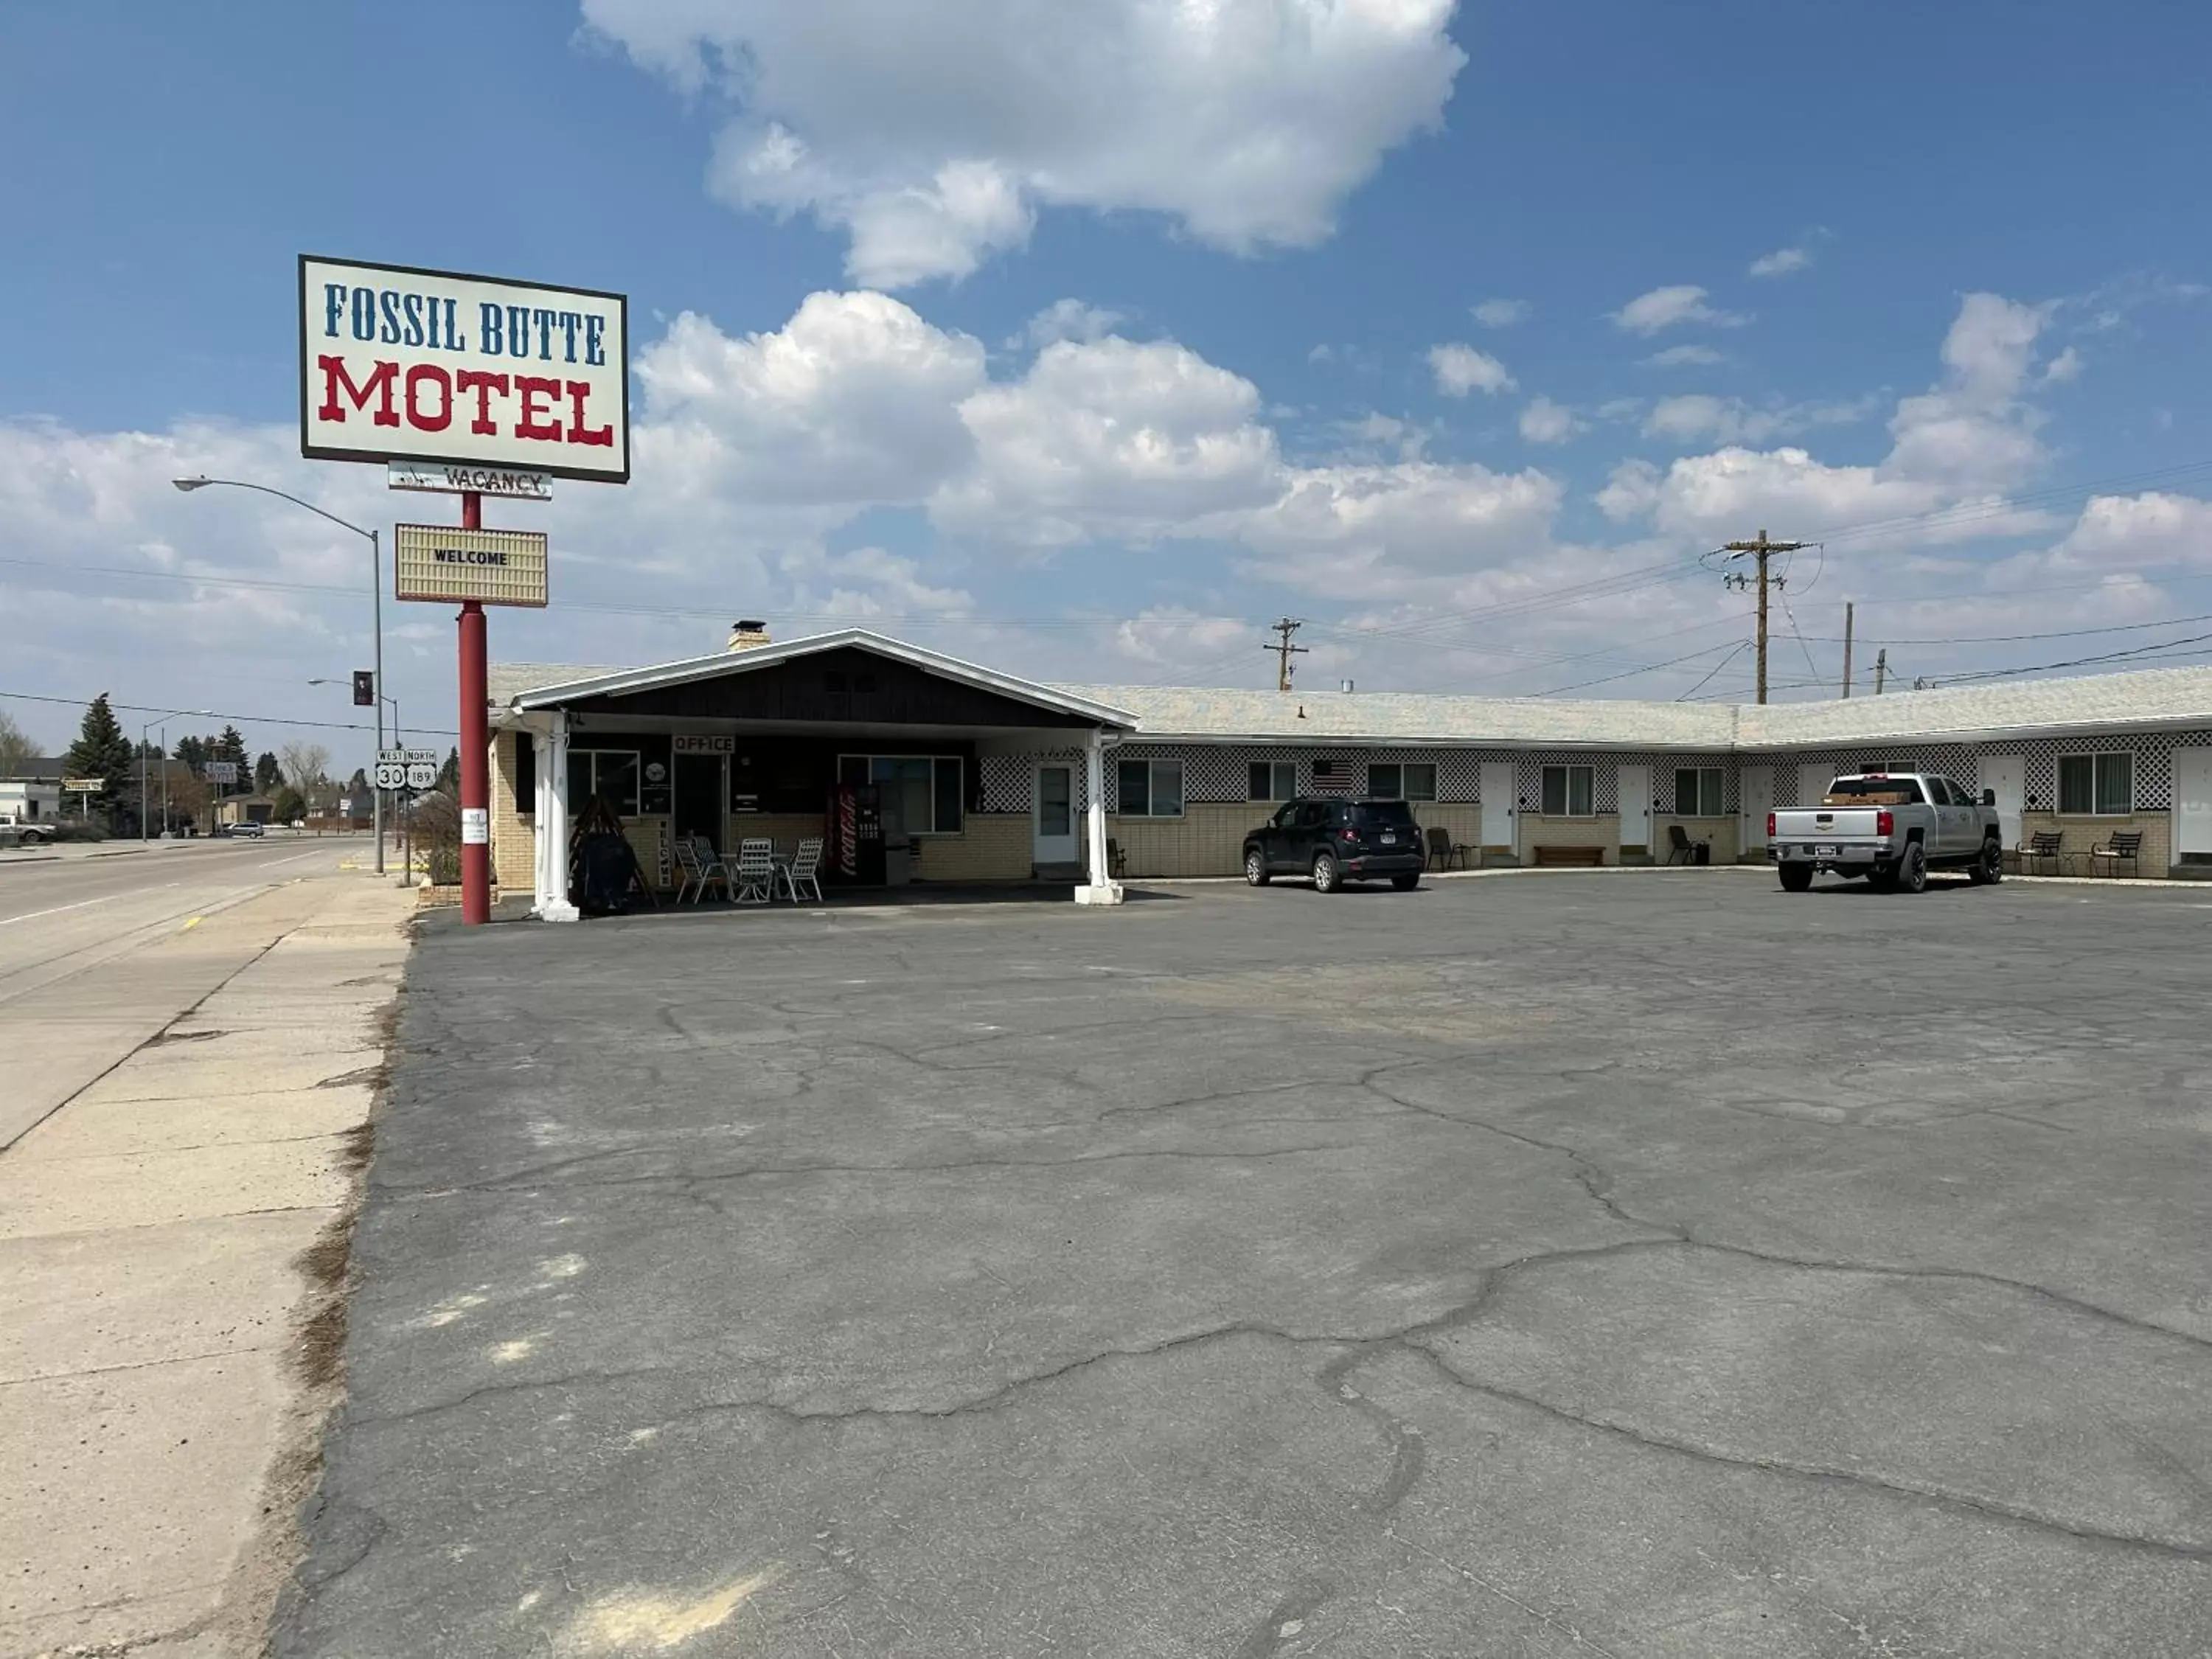 Property Building in Fossil Butte Motel